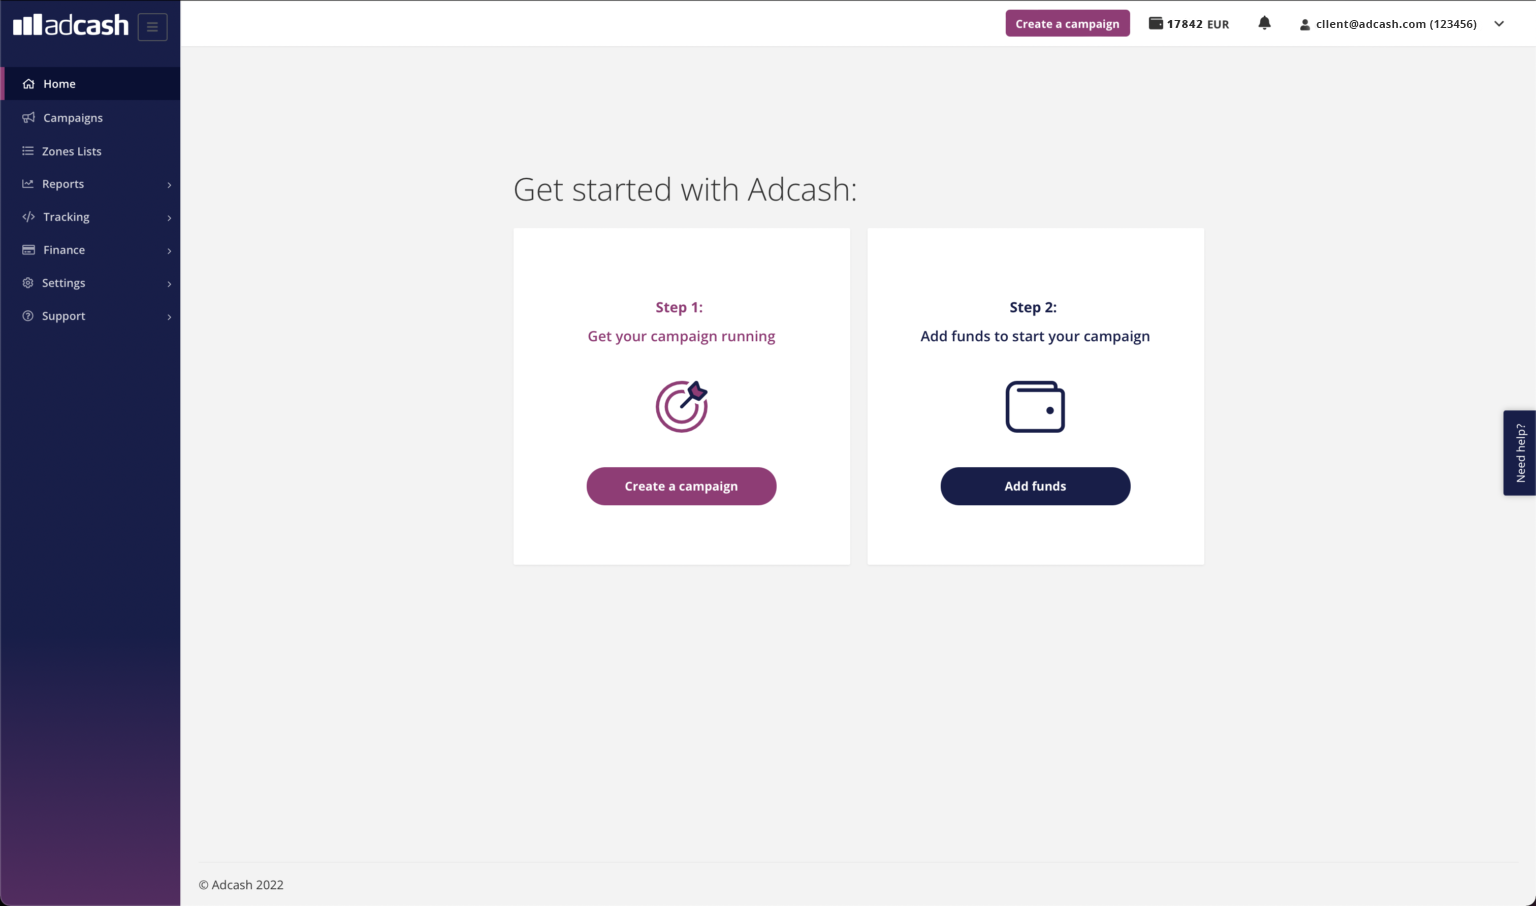 Adcash Advertising Campaign Campaign Creation - homepage